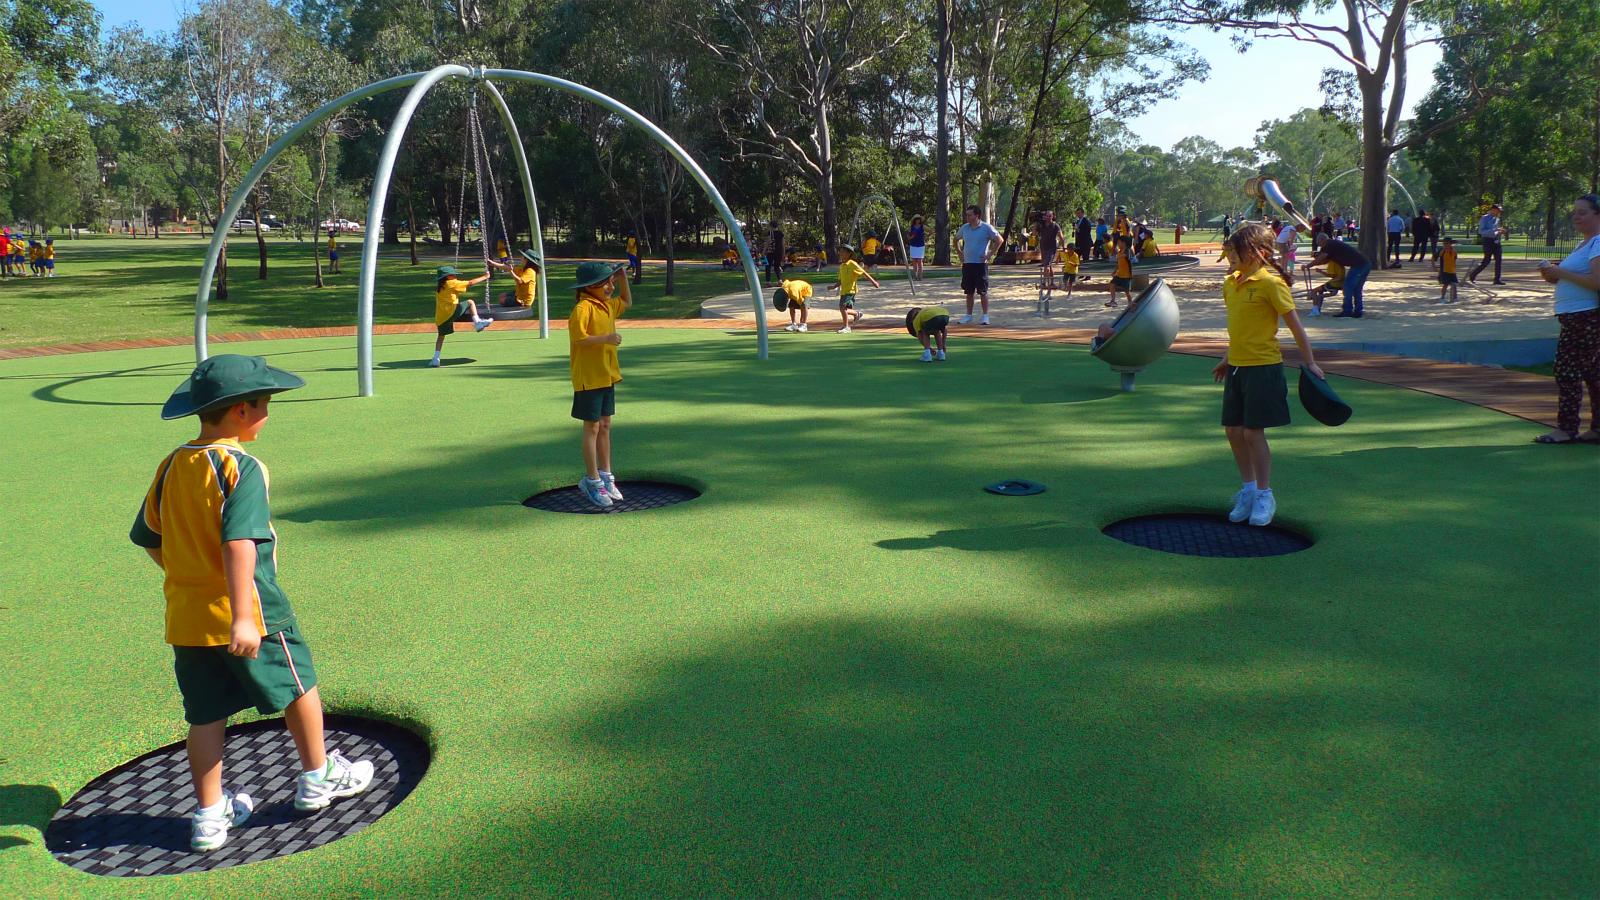 Children dressed in green and yellow school uniforms are playing on a playground with equipment such as a spinning apparatus and circular platforms. The playground, located in a park precinct surrounded by trees and open grassy paddocks, has more people visible in the background.